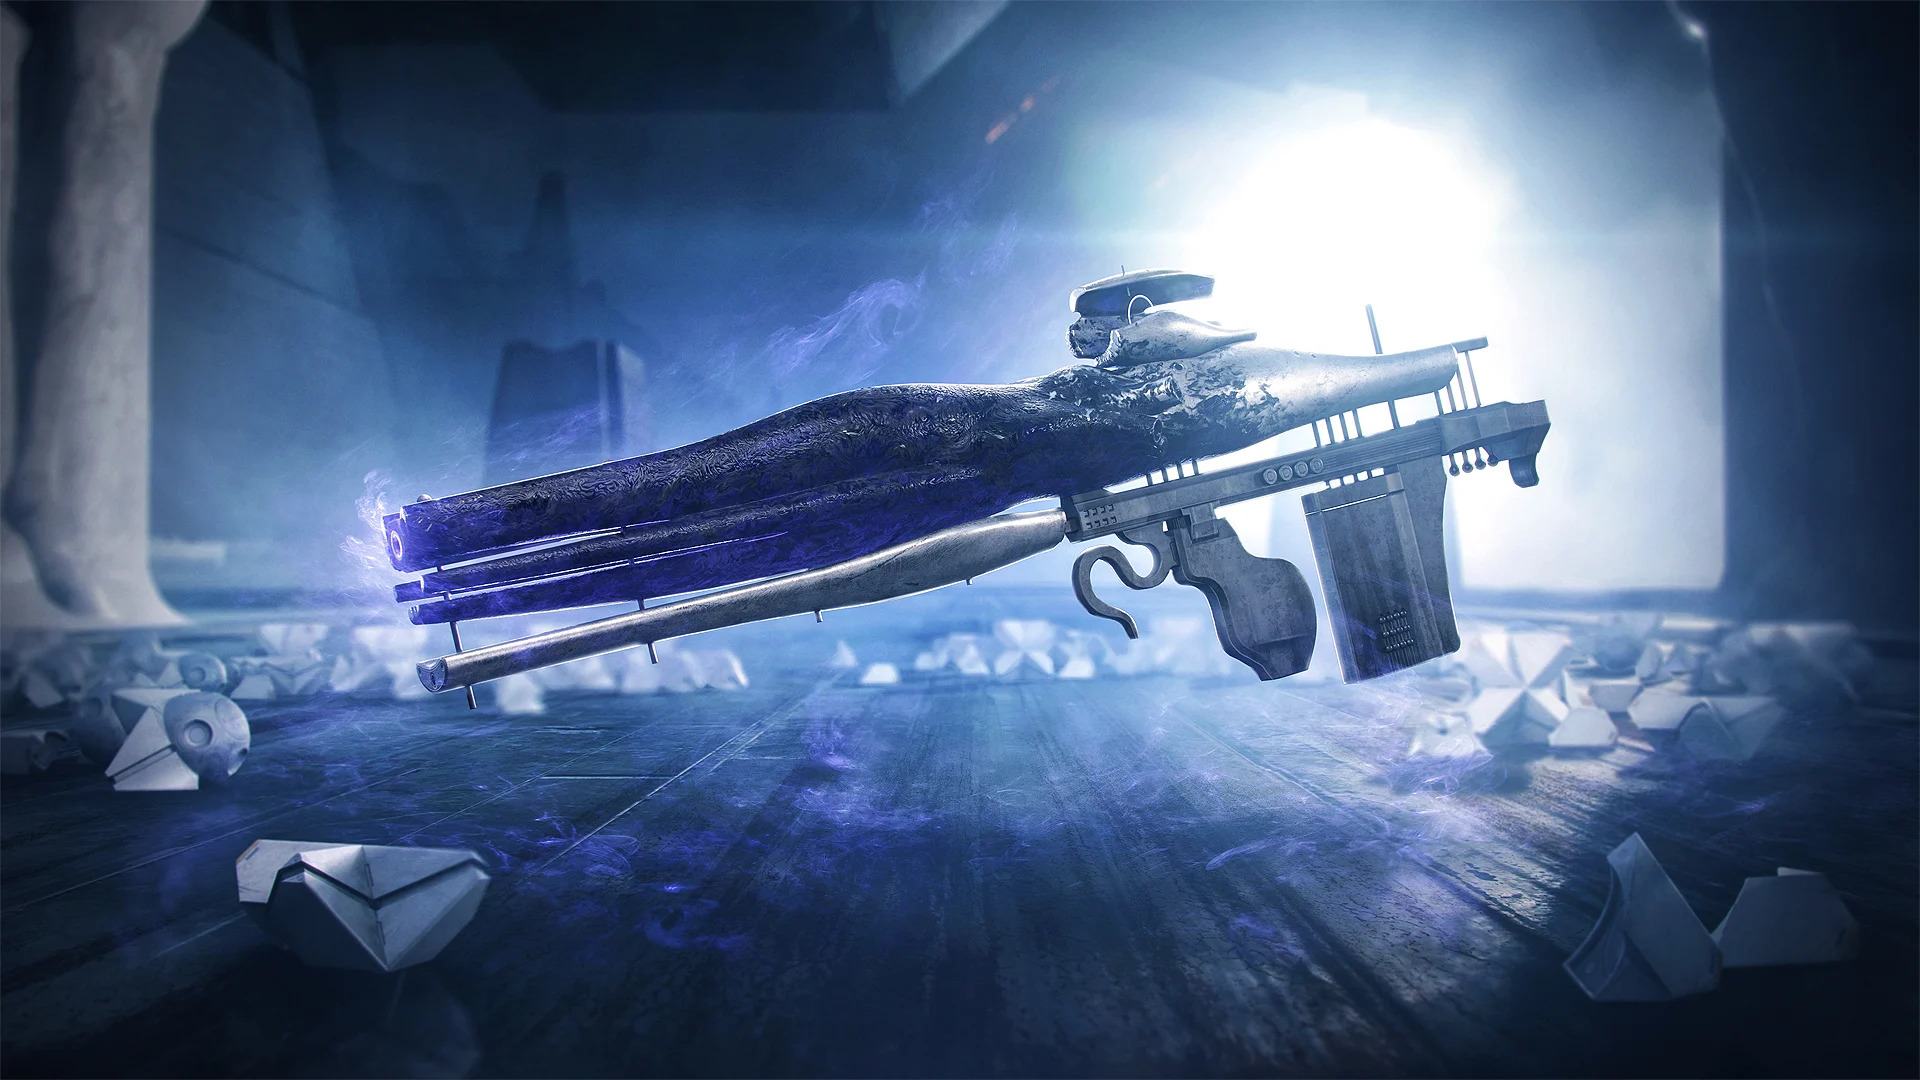 The Collective Obligation pulse rifle in Destiny 2